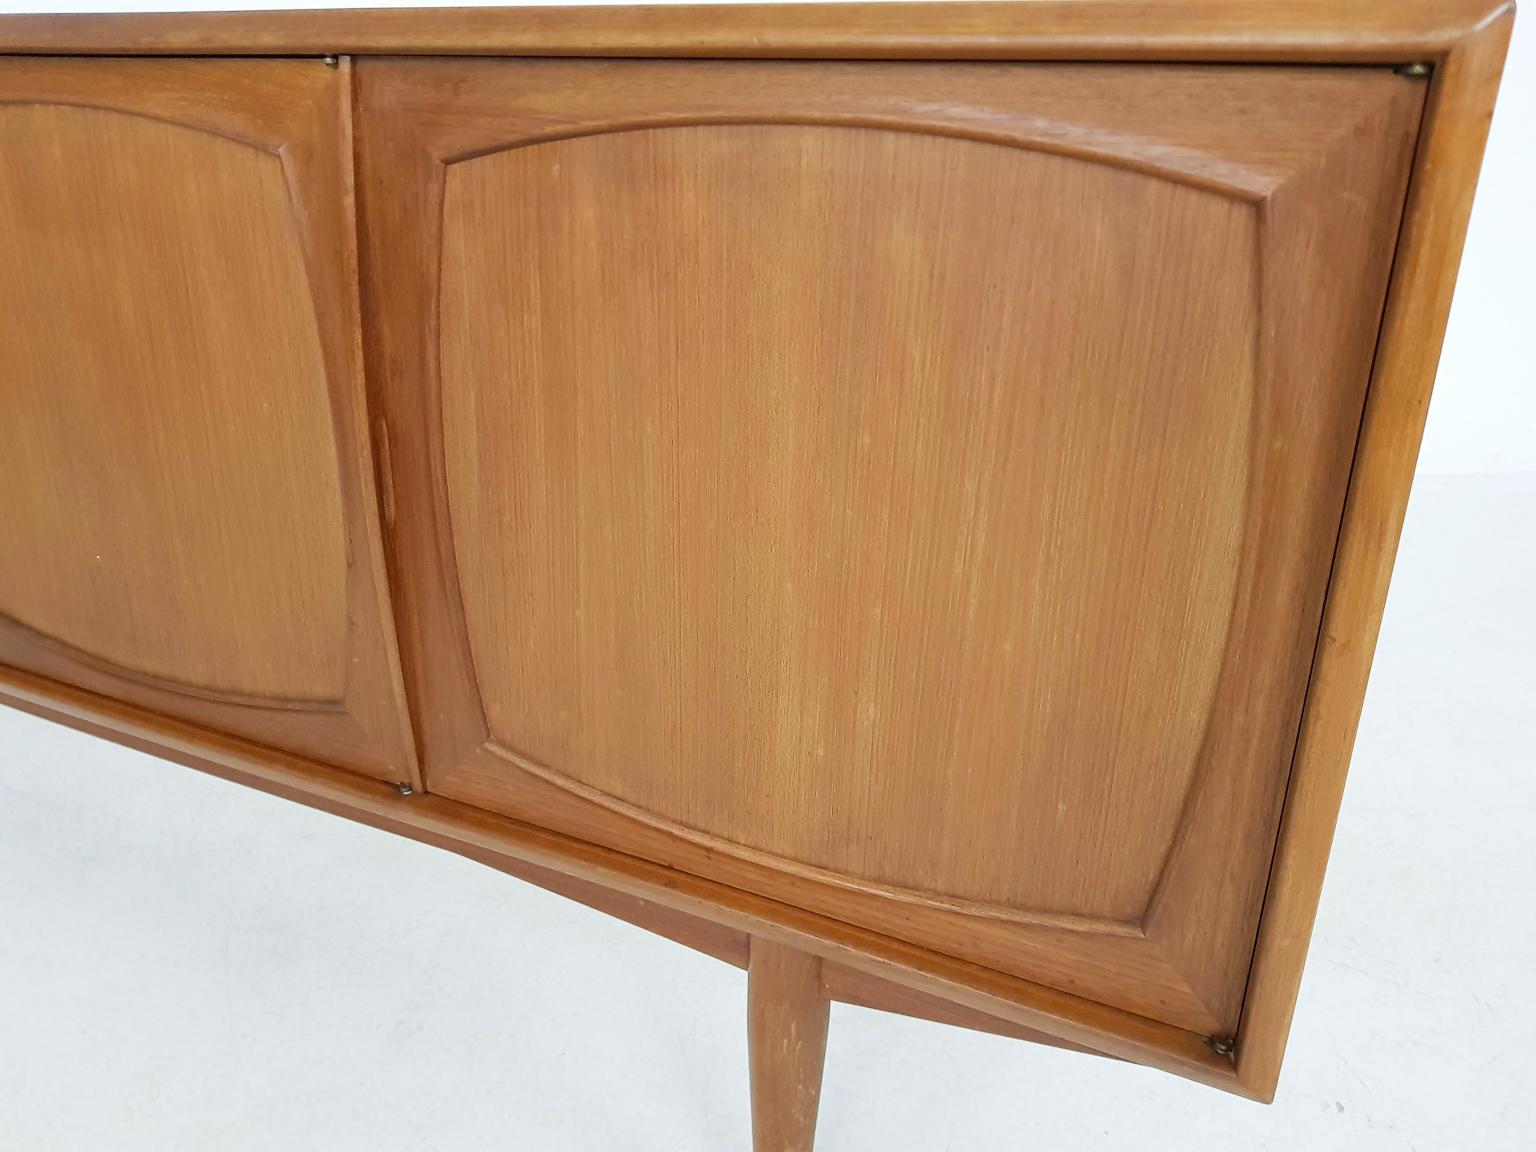 20th Century Adolf Relling and Rolf Rastad for Bahus Teak Credenza or Sideboard, Norway 1960s